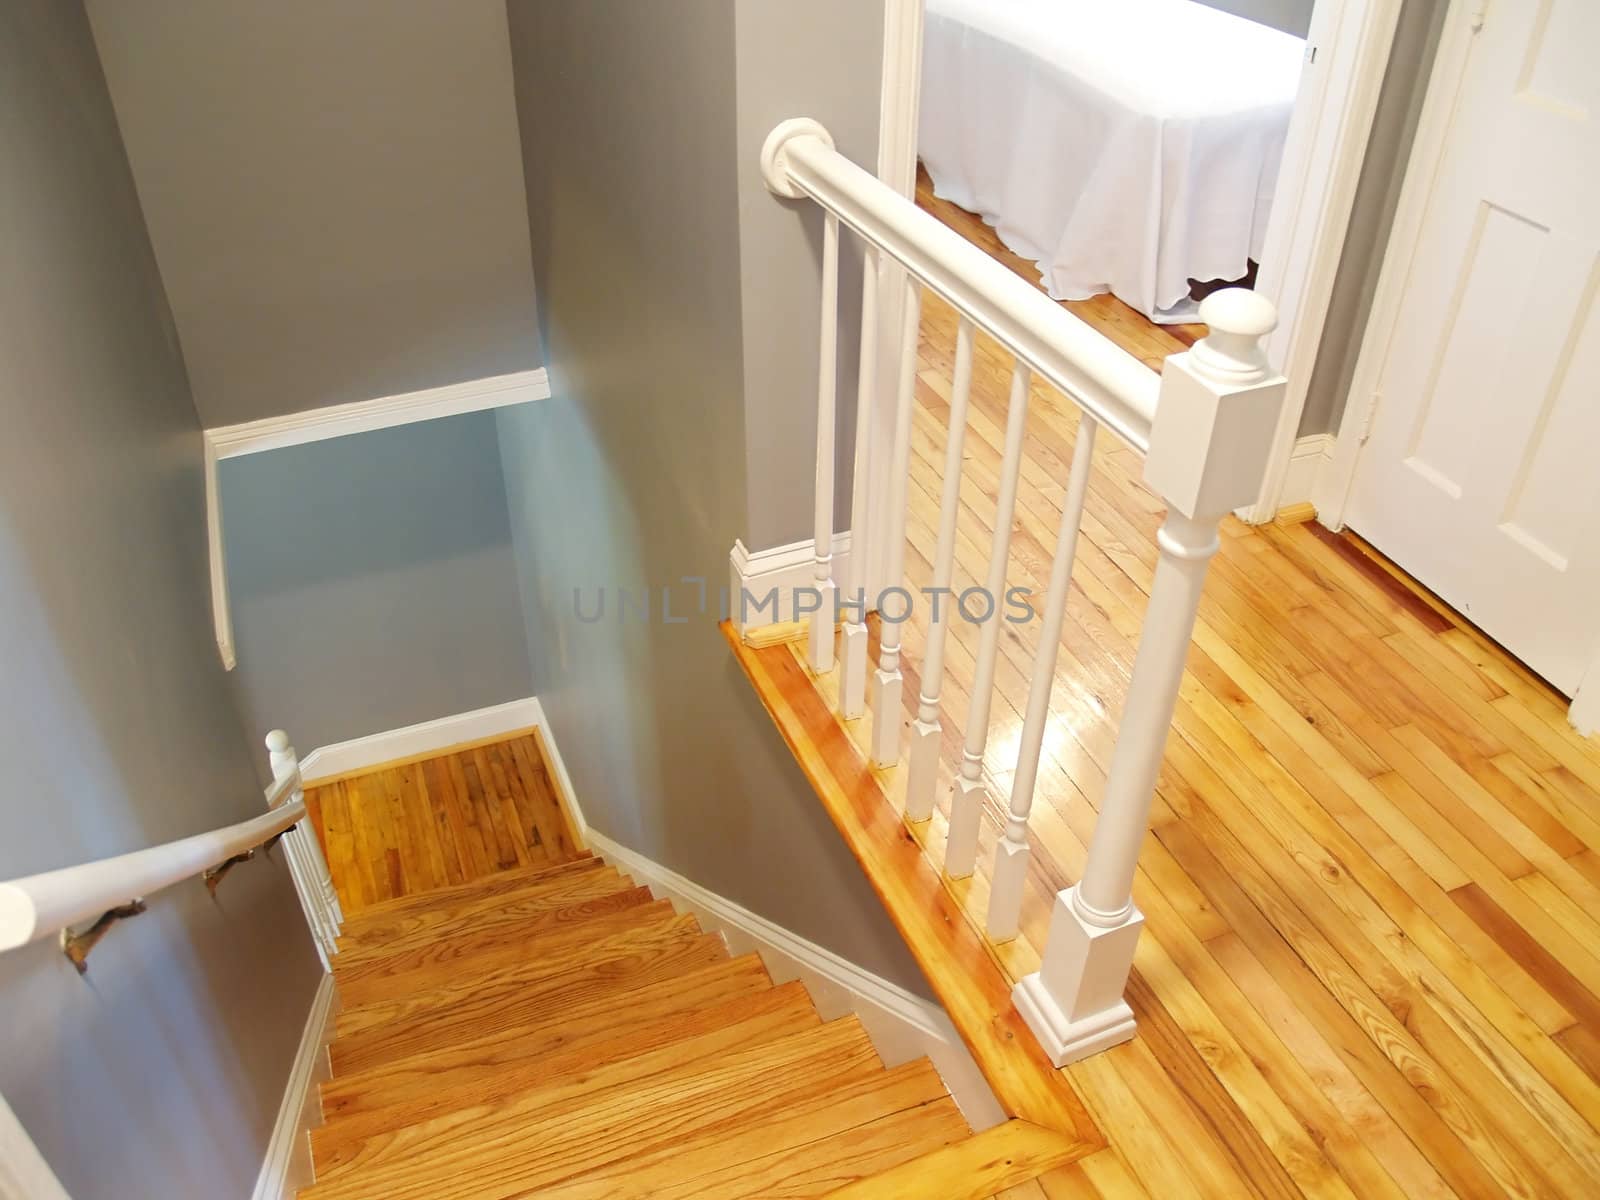 A refinished wooden floor and steps in a stairway. White painted railings and woodwork accent the classic gray walls